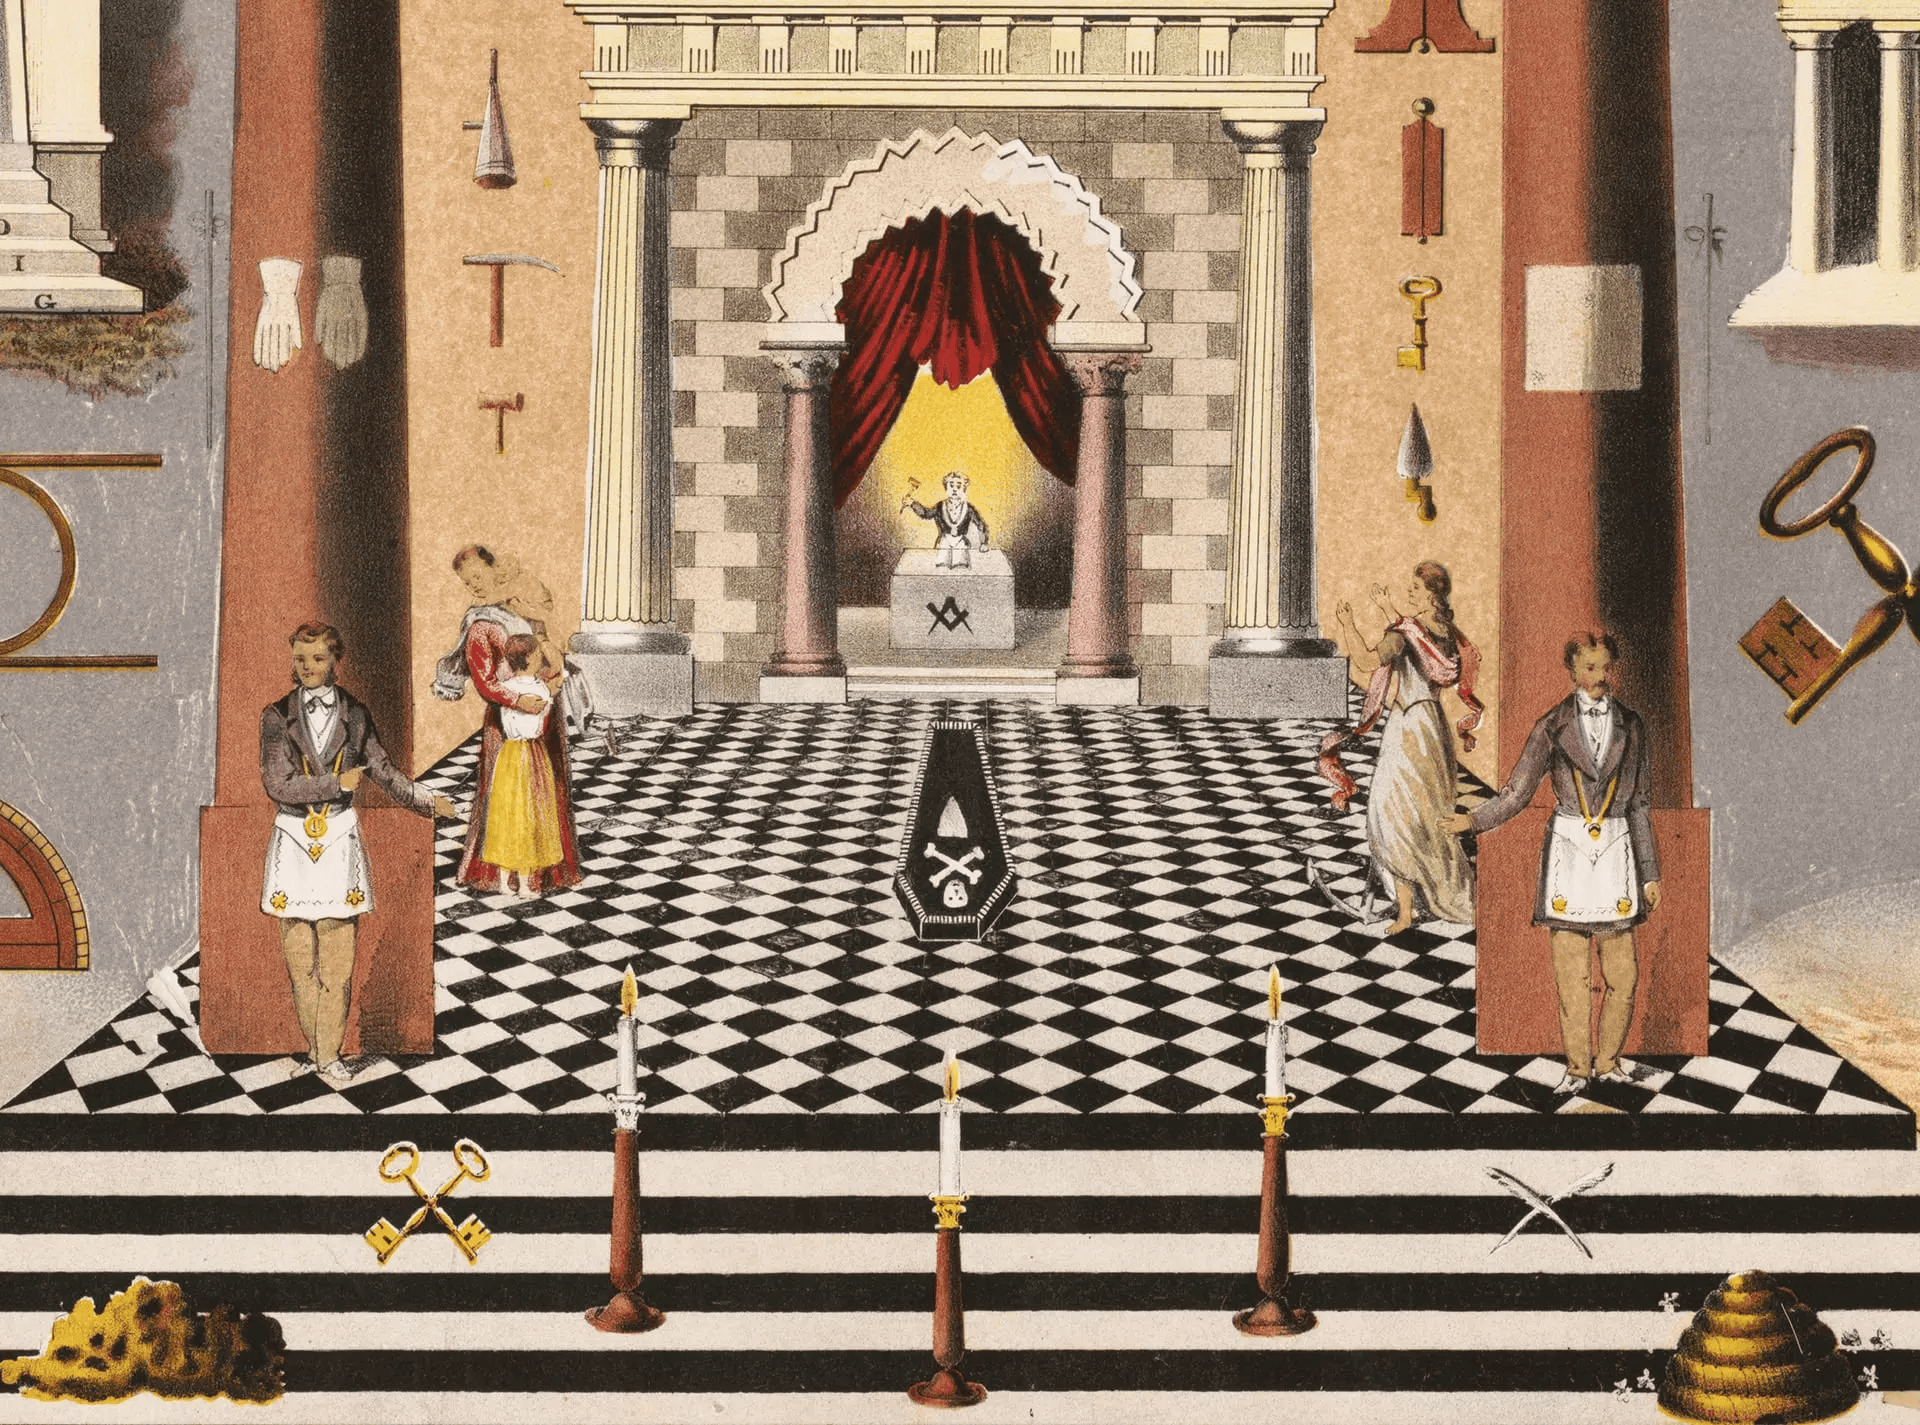 The black and white checkered pattern on the floor of a masonic temple linked to rennes-le-château